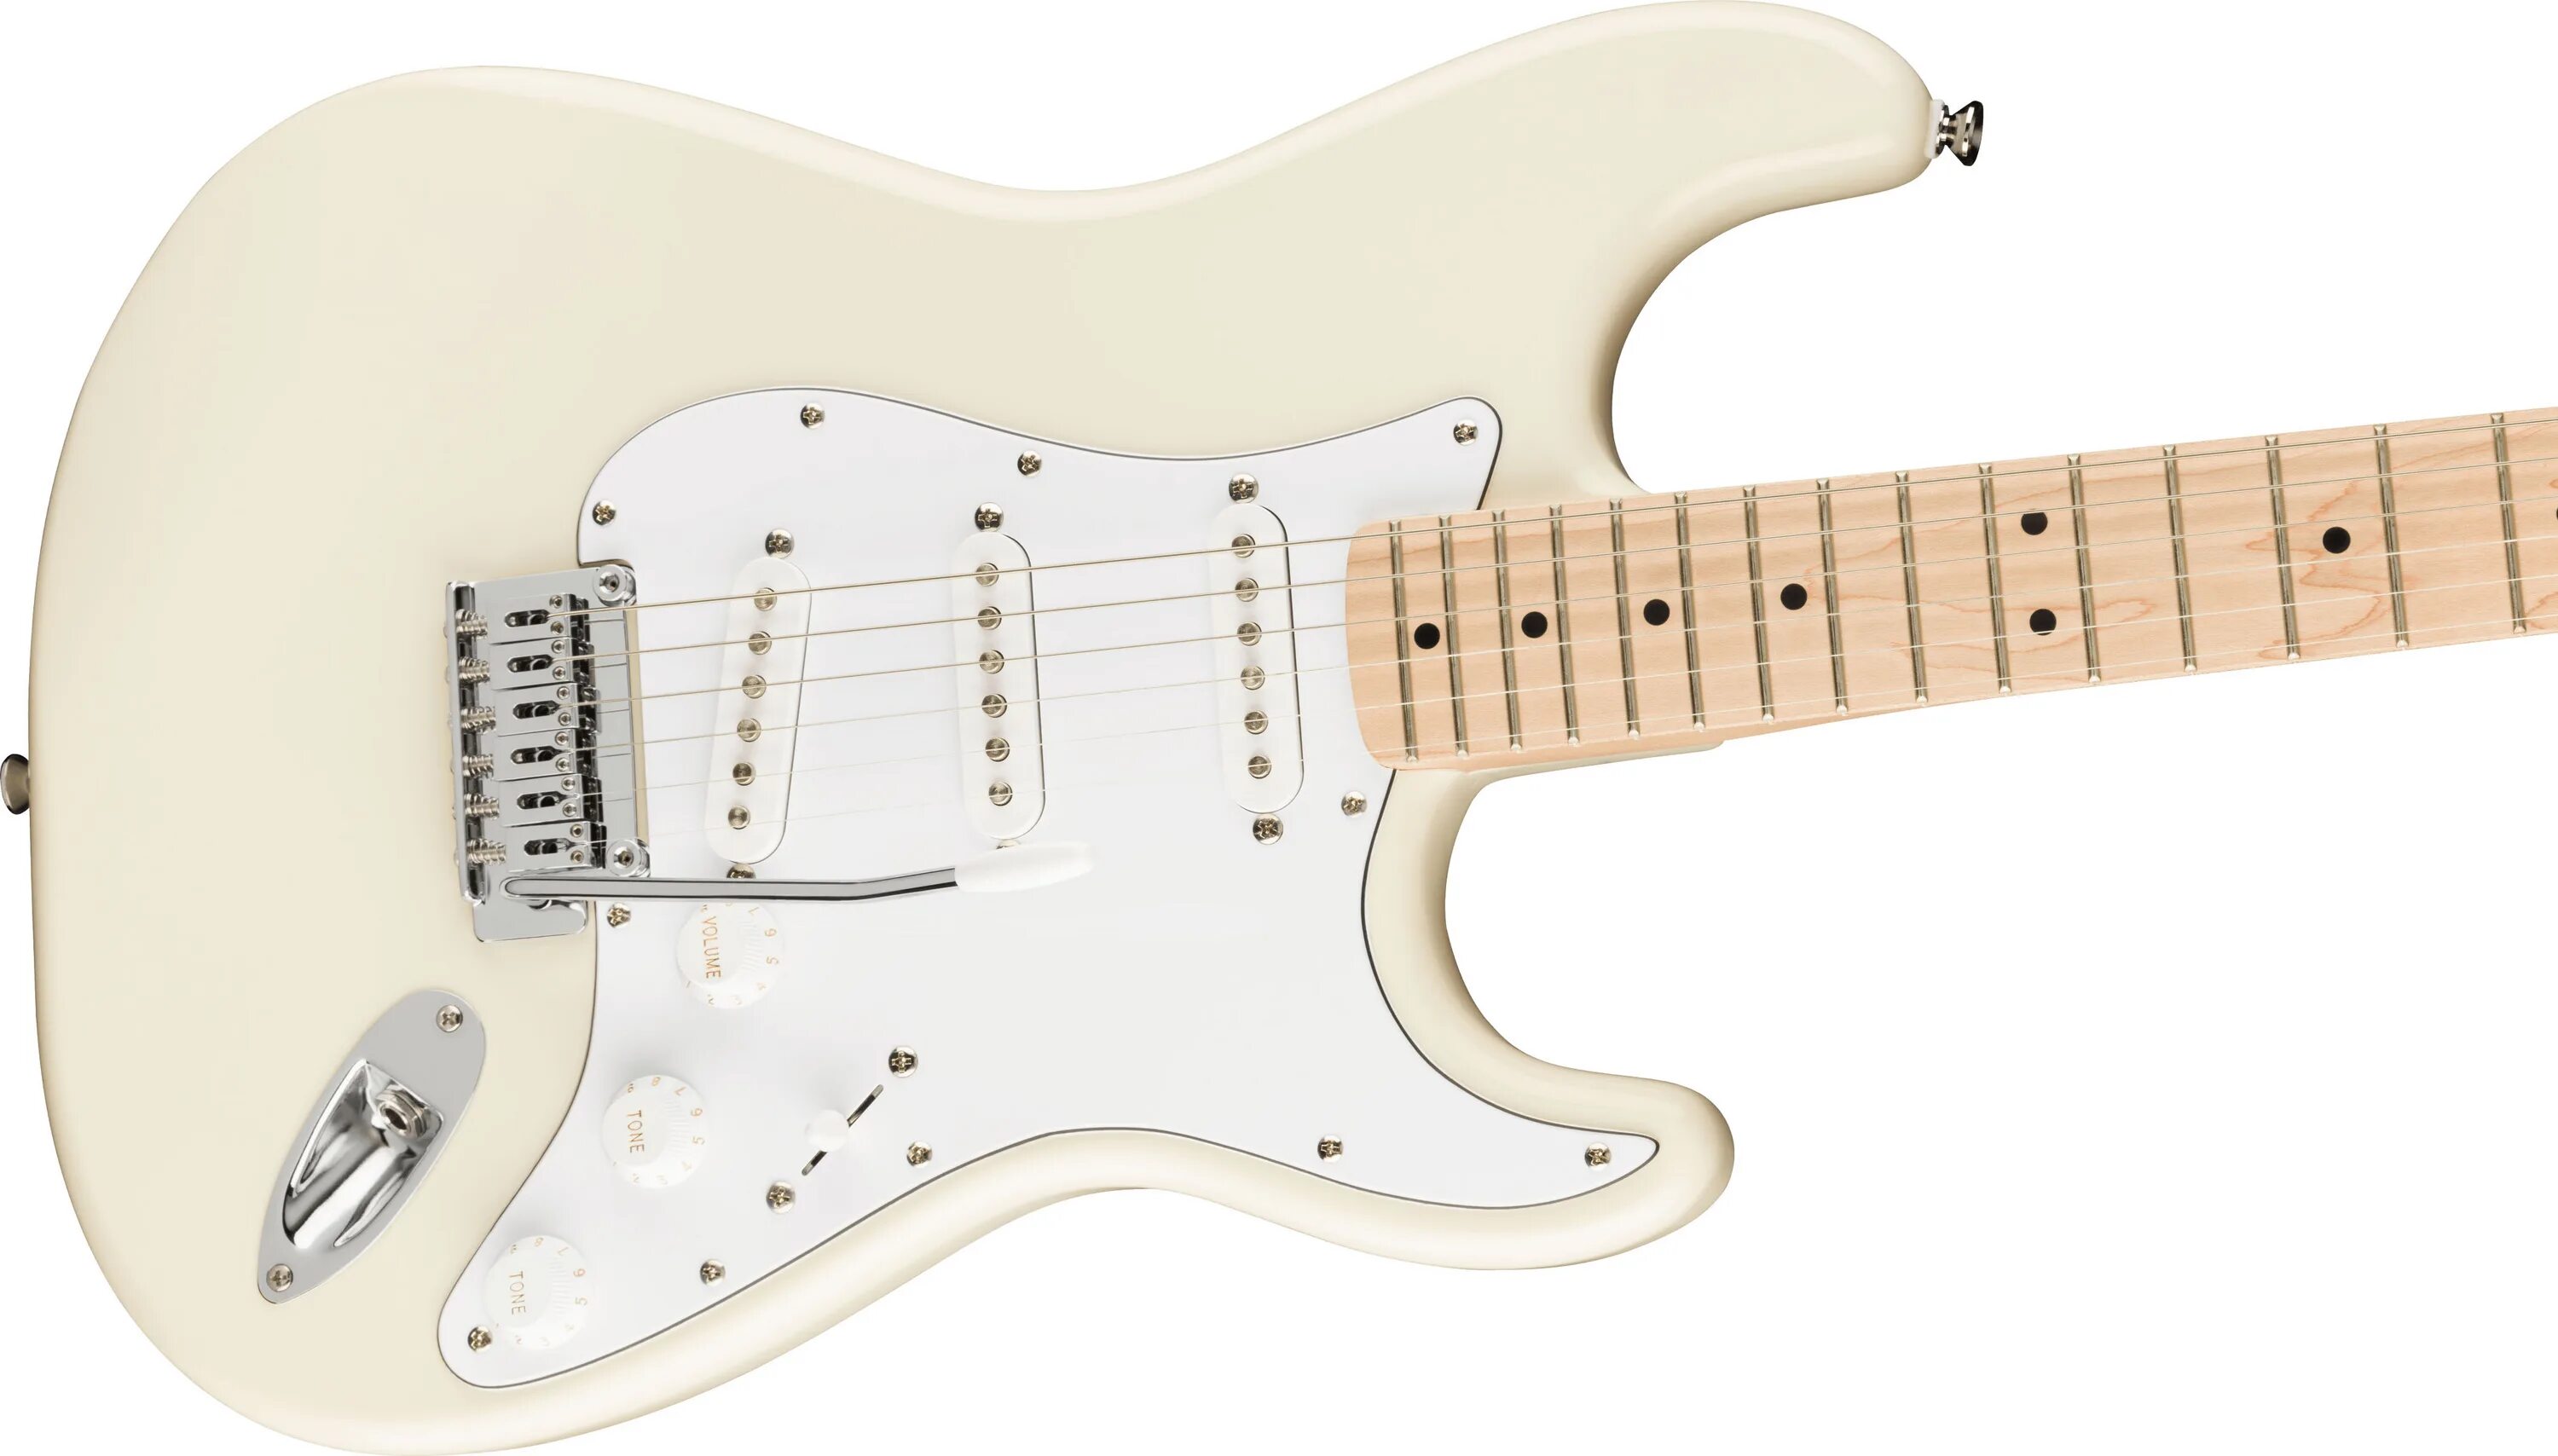 Fender Stratocaster Affinity Olympic White. Fender Squier Olympic White. Fender American professional Stratocaster. Электрогитара Fender Squier Stratocaster.